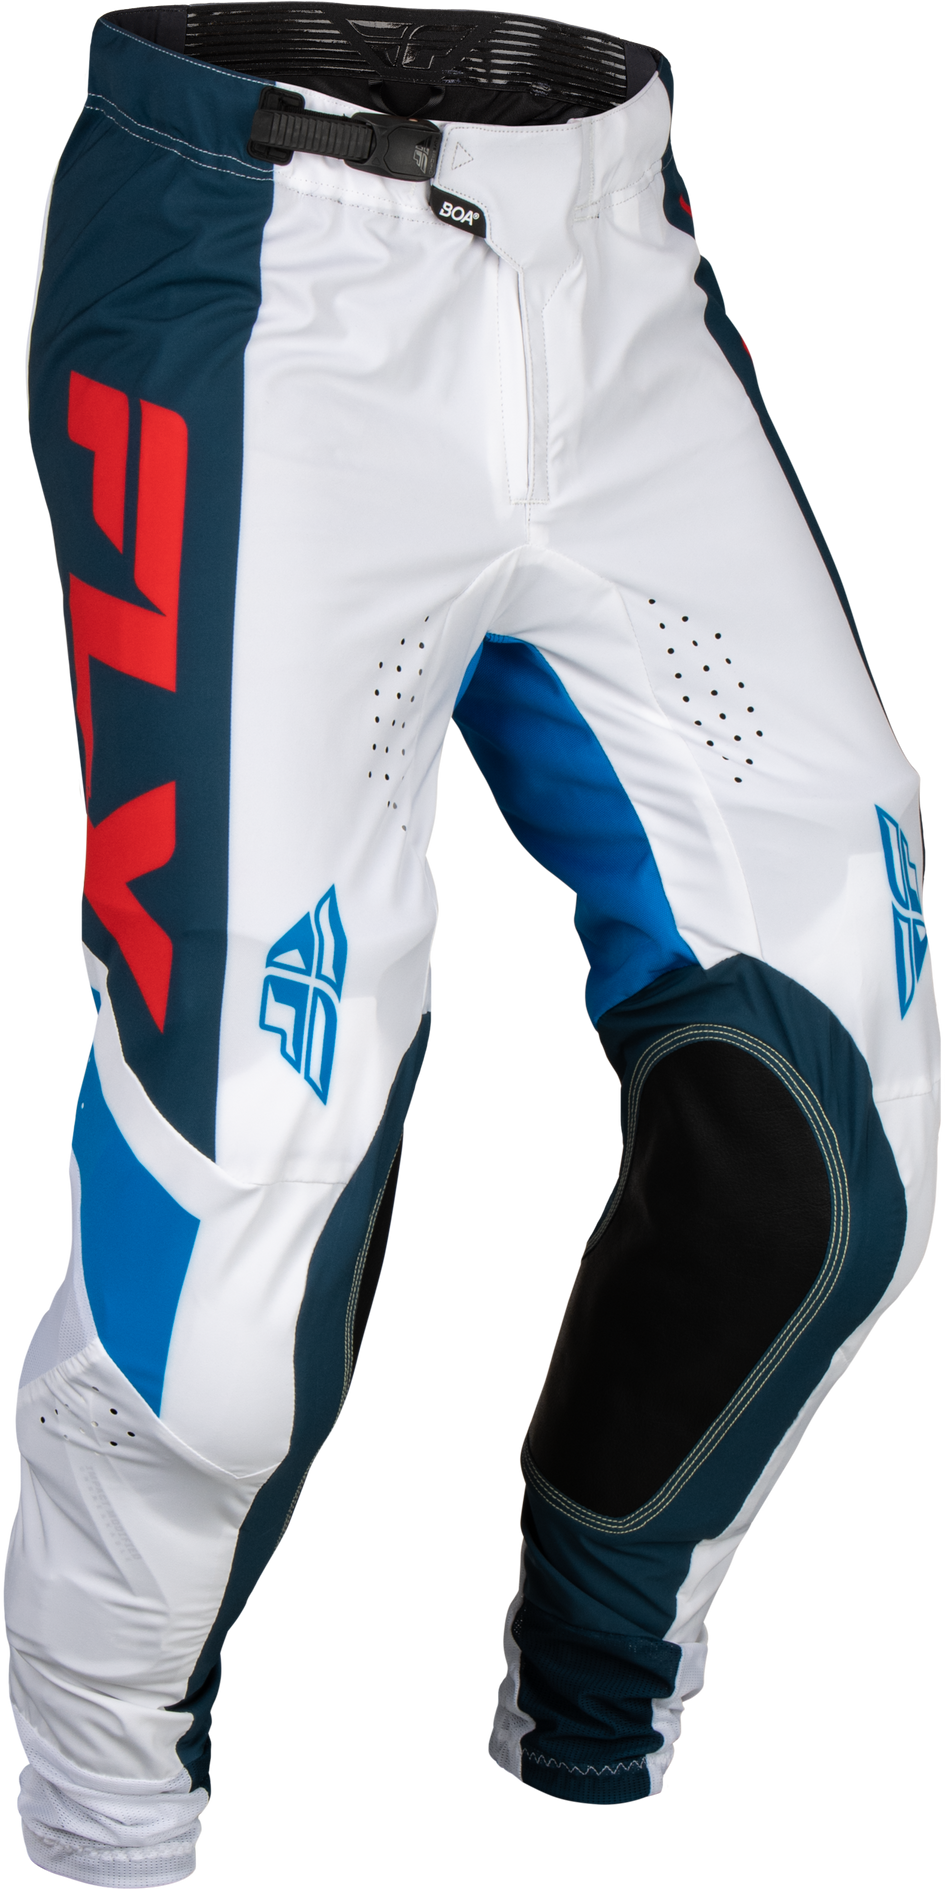 FLY RACING Lite Pants Red/White/Navy Sz 30 377-73330